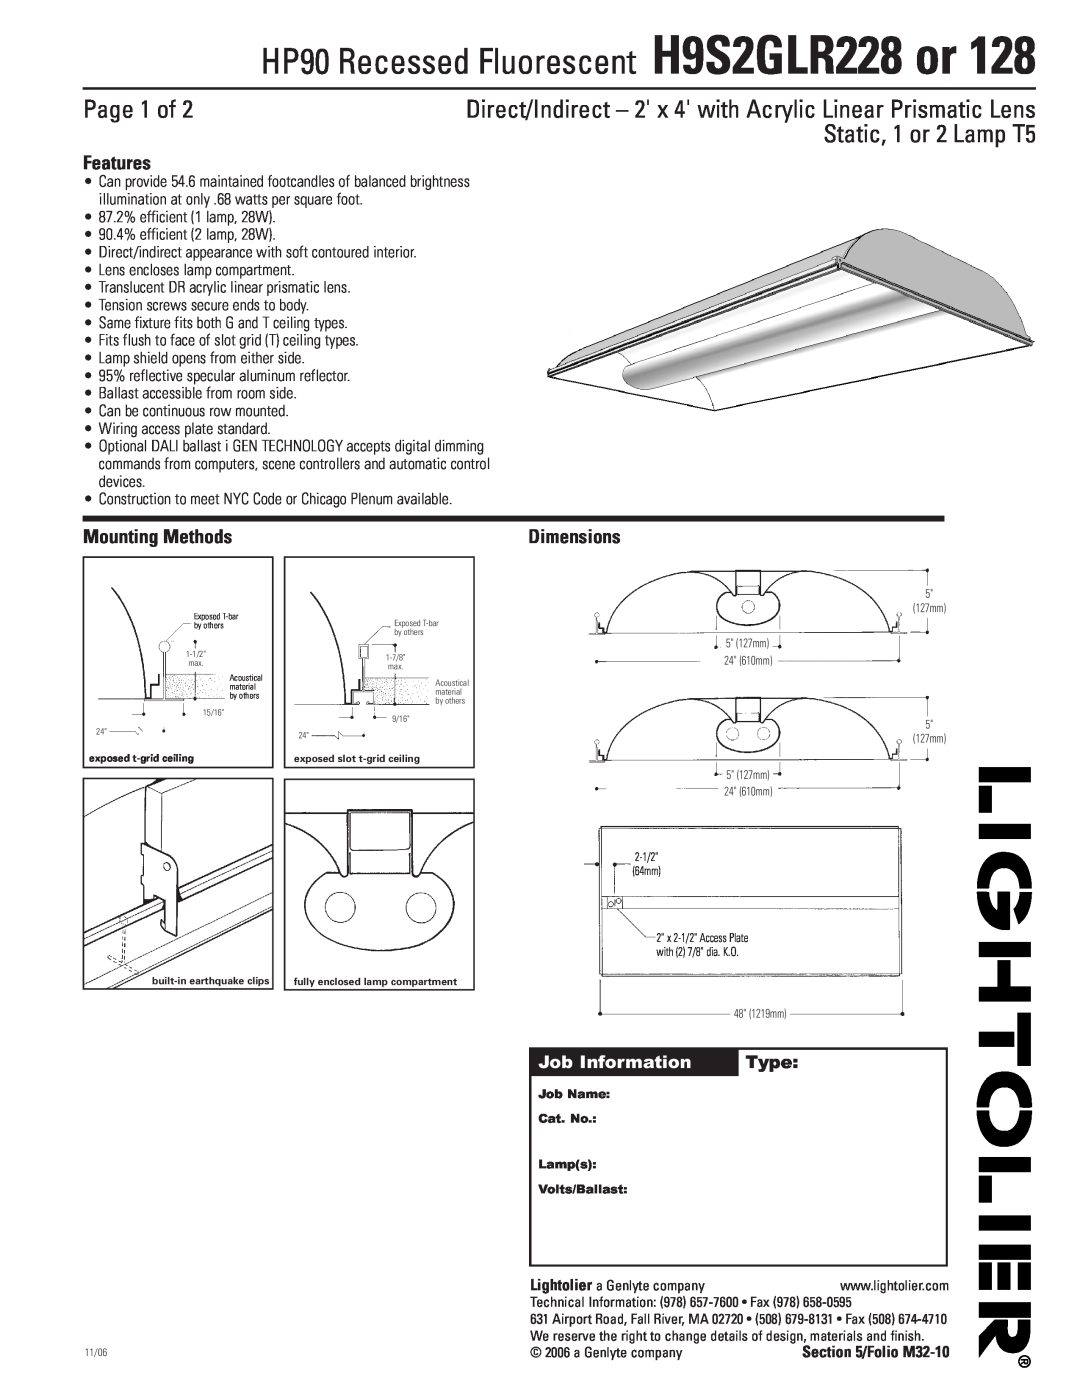 Lightolier H9S2GLR228 dimensions Page 1 of, Static, 1 or 2 Lamp T5, Features, Mounting Methods, Dimensions, Type 